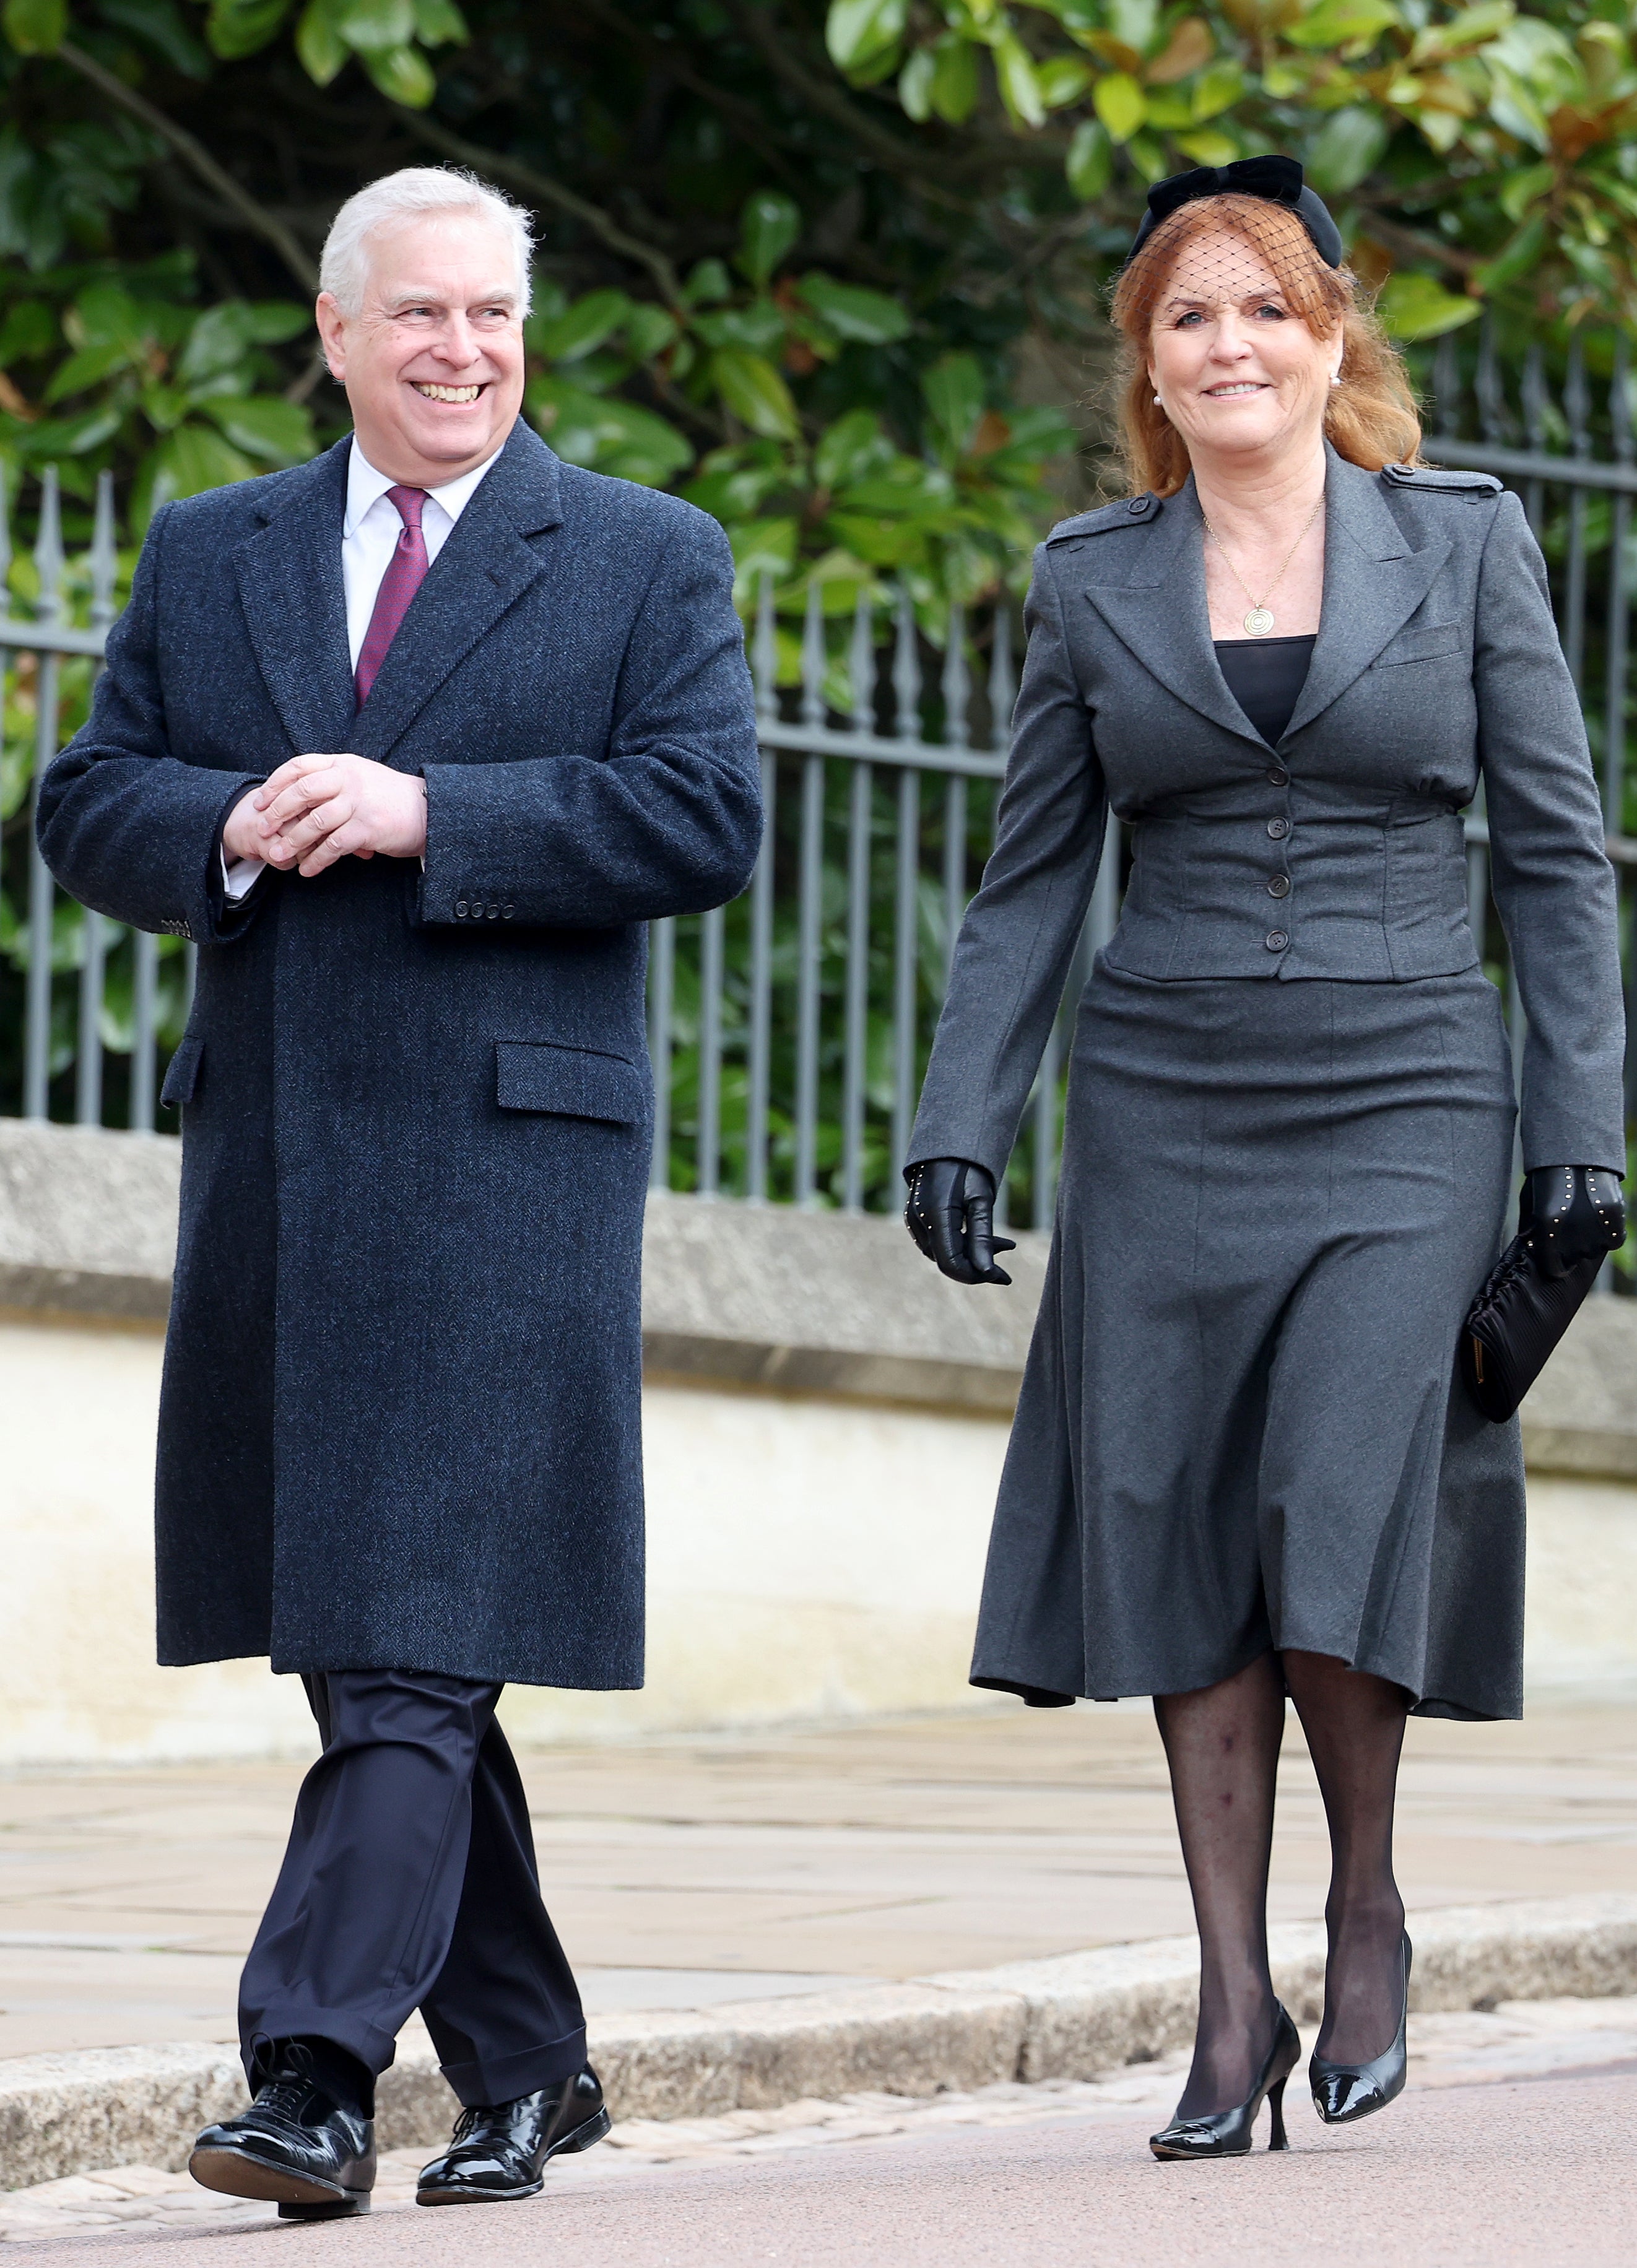 Prince Andrew alongside his ex-wife Sarah Ferguson who was diagnosed with malignant melanoma, a form of skin cancer, this year